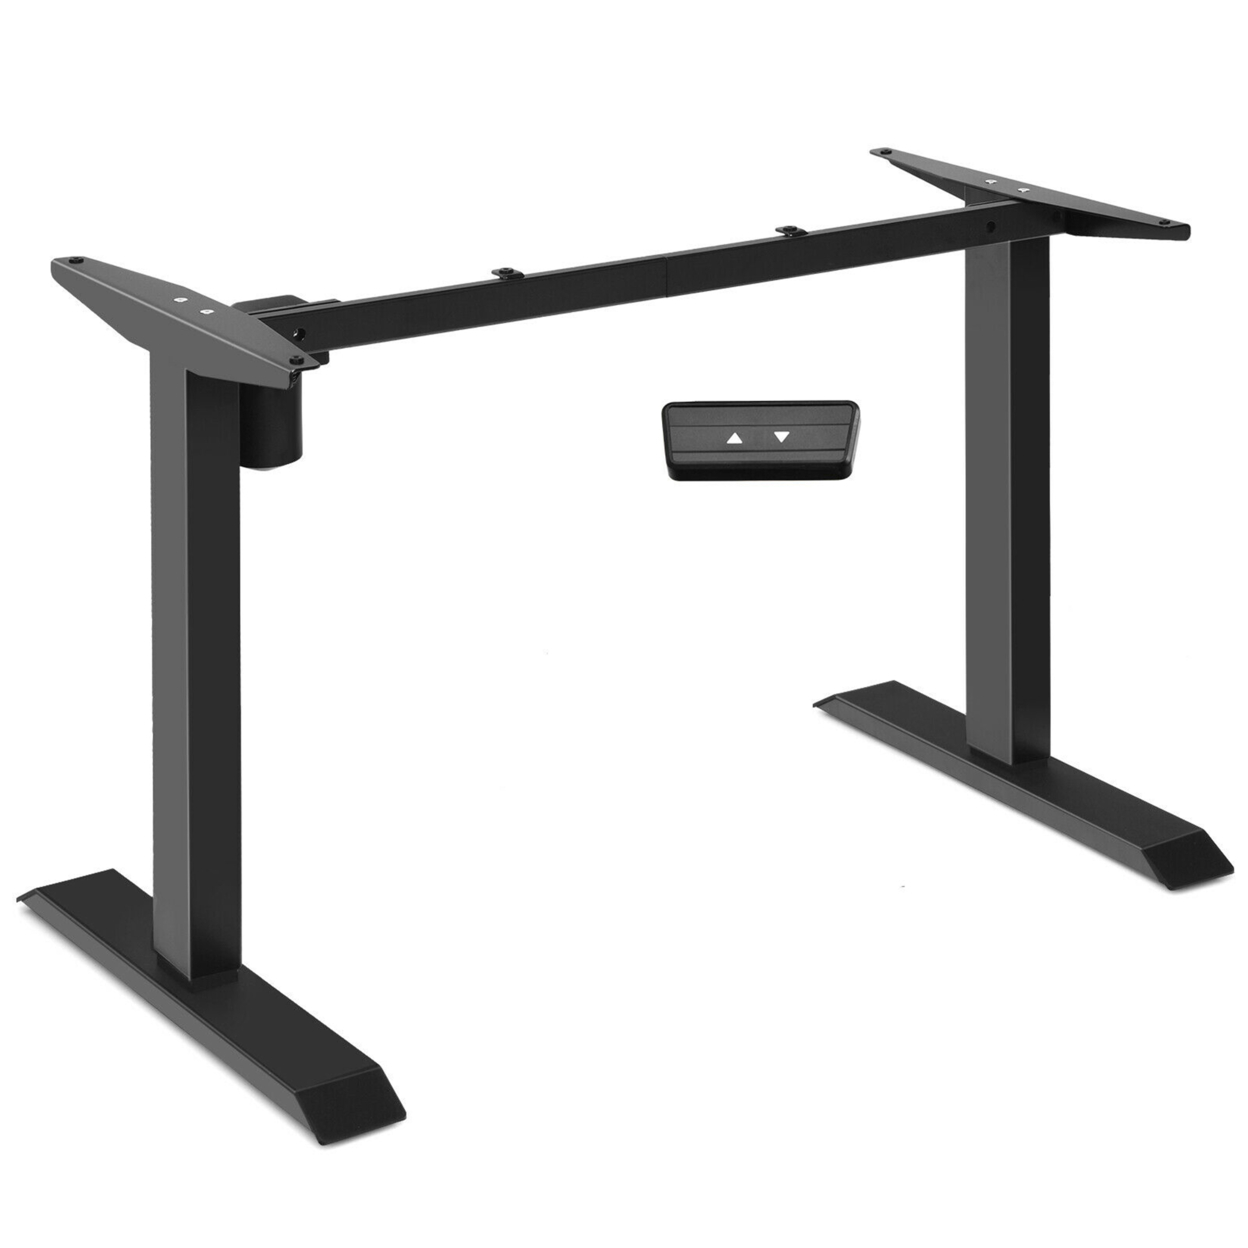 Electric Sit To Stand Adjustable Desk Frame W/ Button Controller - Black